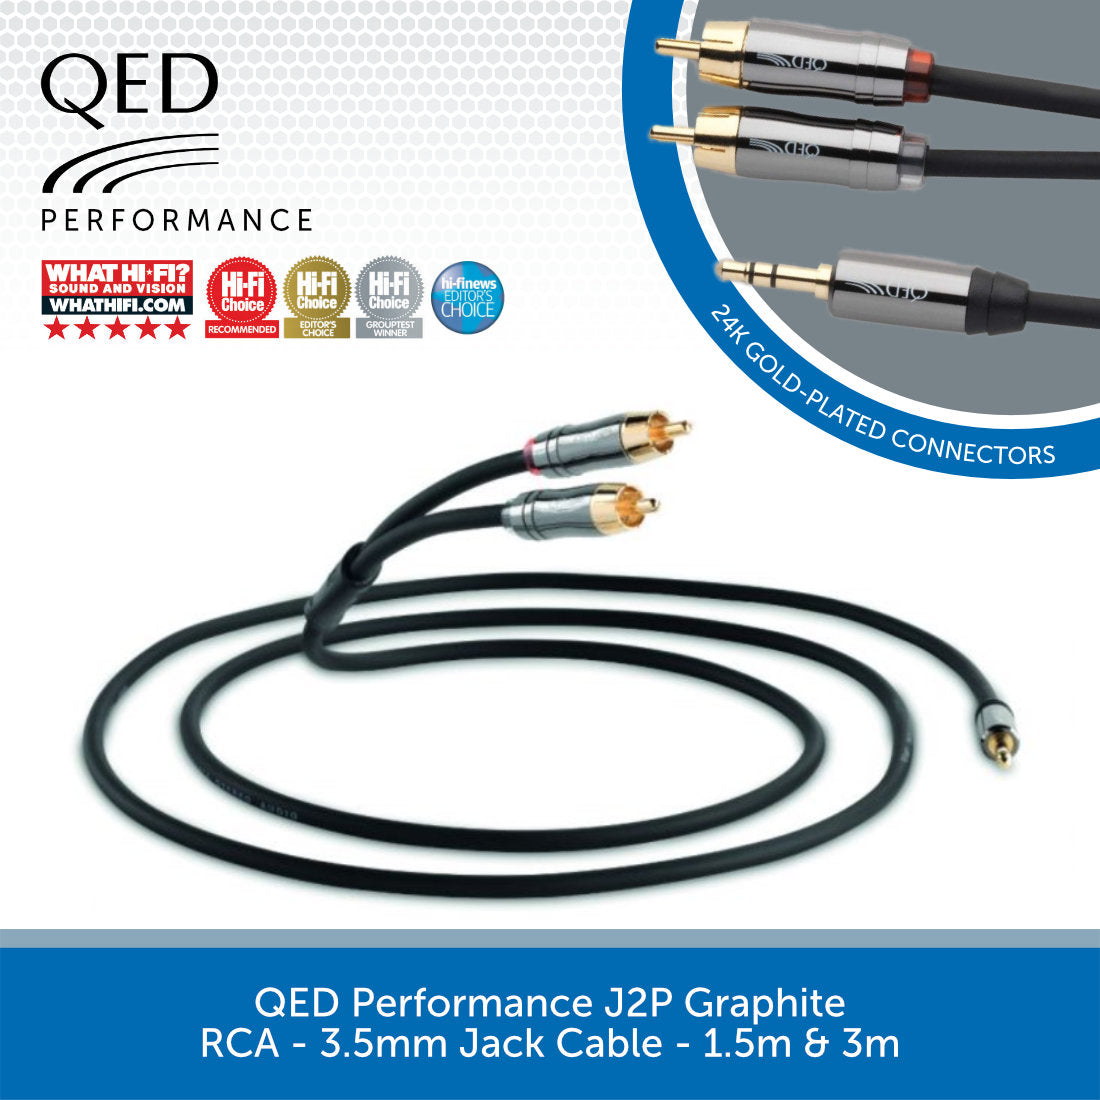 QED Performance J2P Graphite RCA-3.5mm Jack Cable